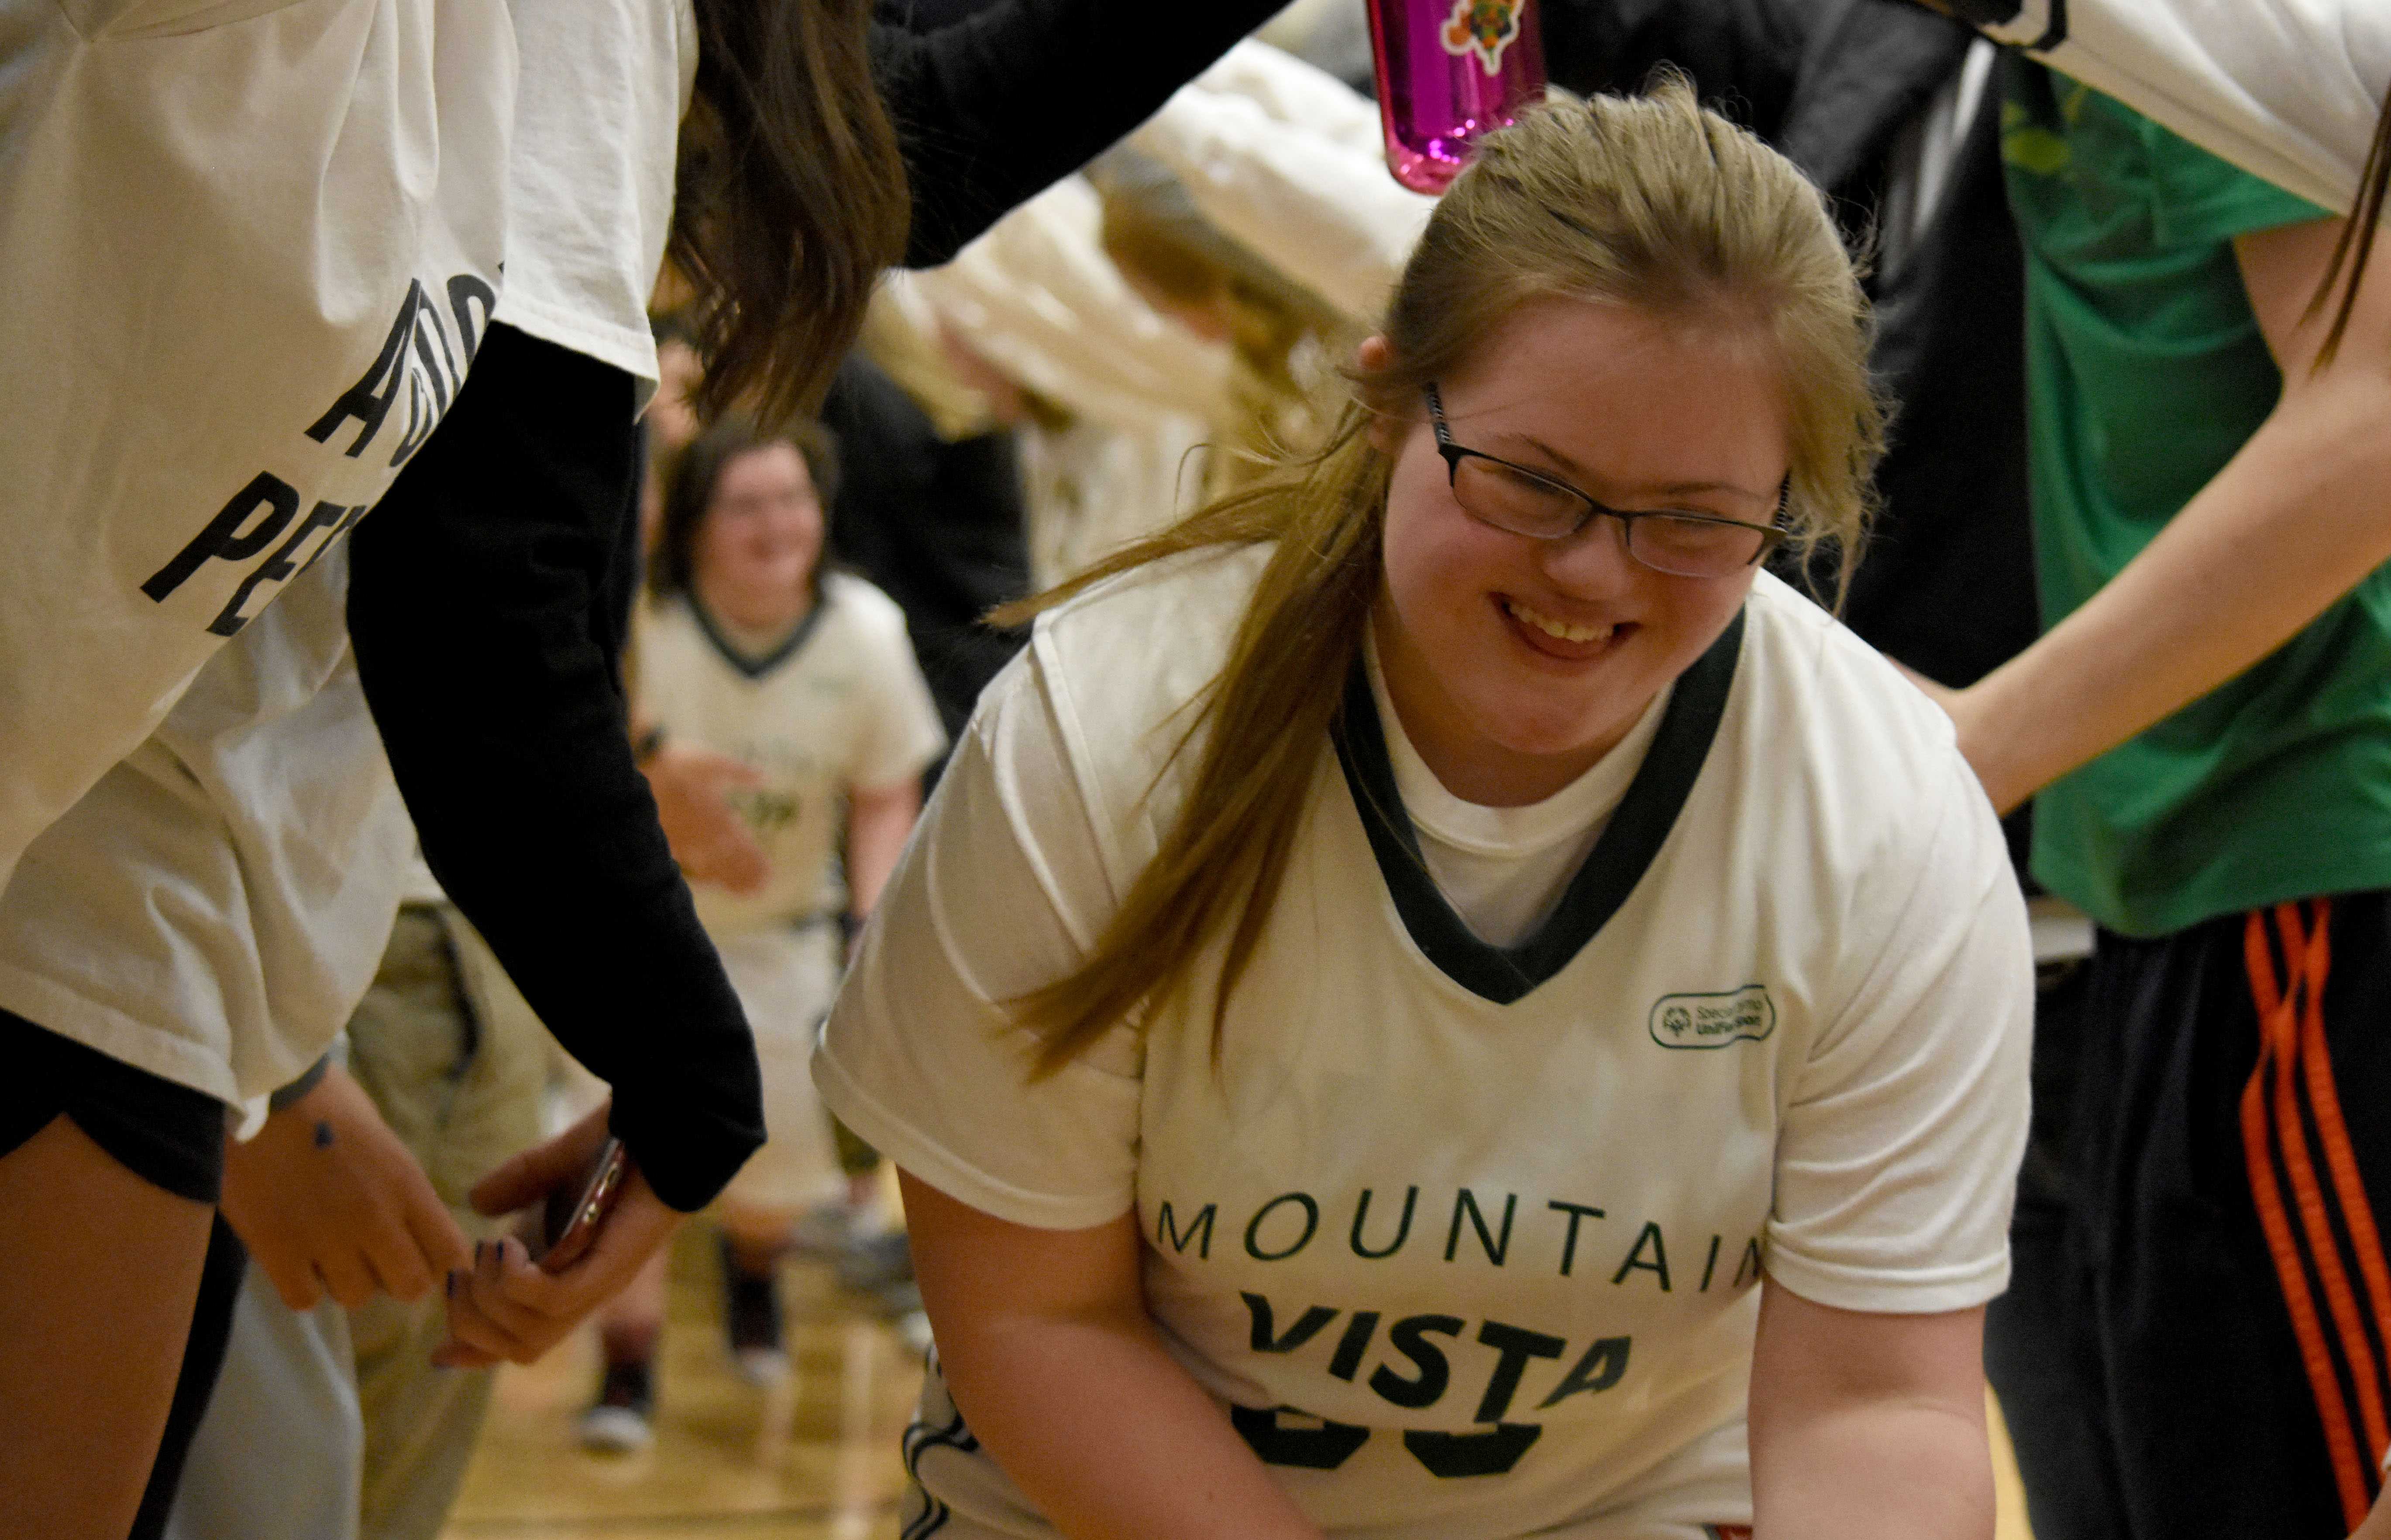 Unified+wraps+up+another+exciting+basketball+season